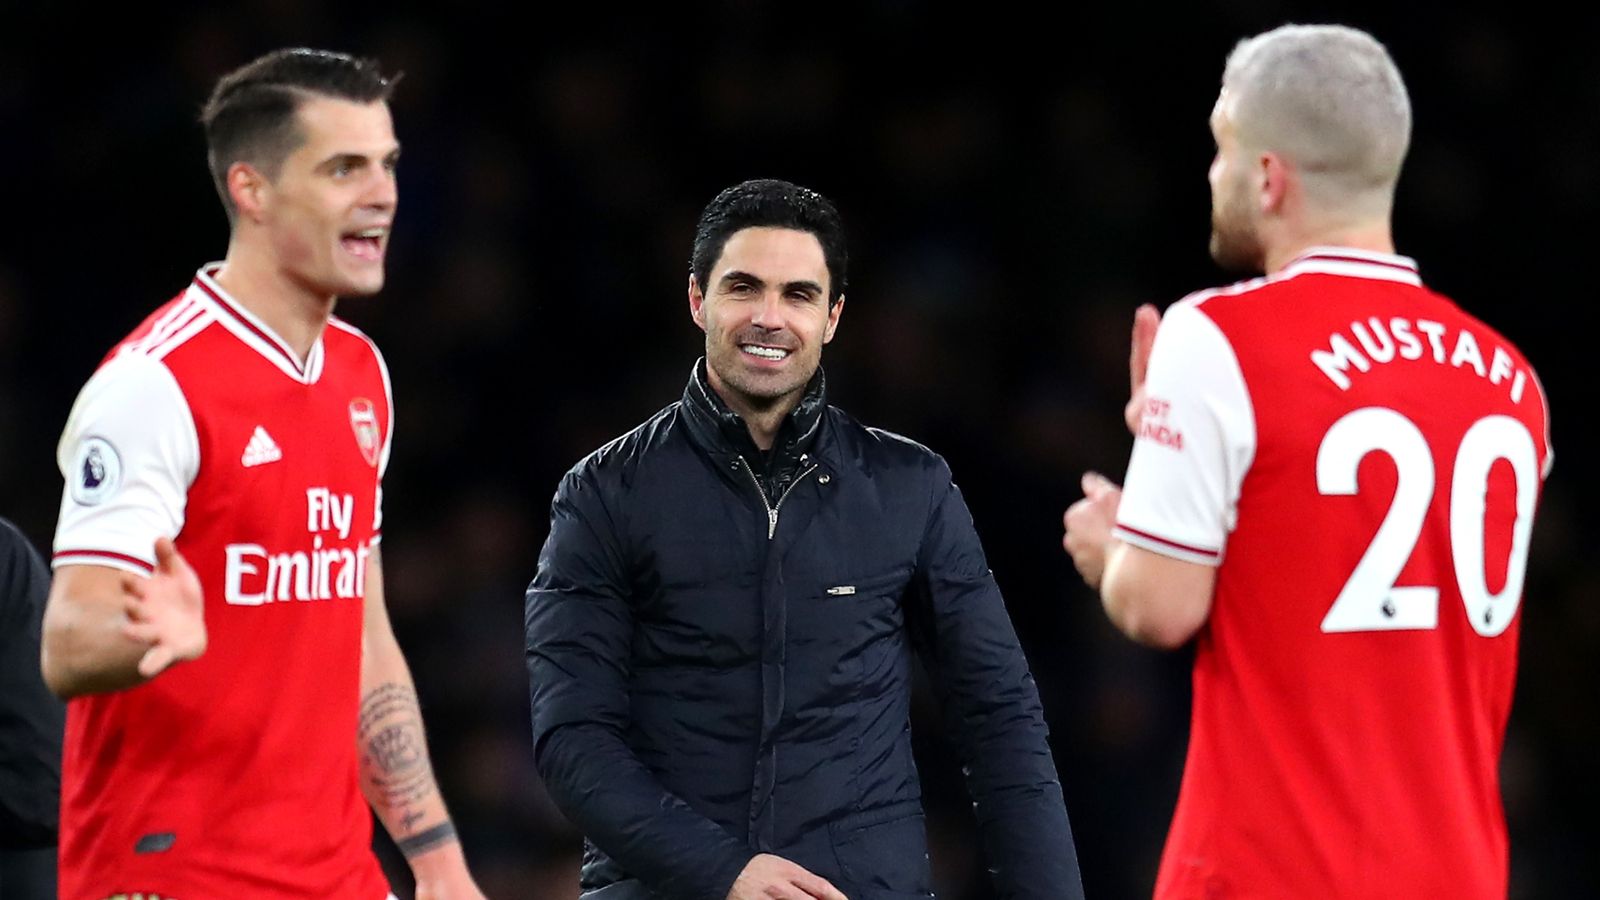 Paul Merson Says Mikel Arteta may benefit at Arsenal if transfer market changes Football News Sky Sports